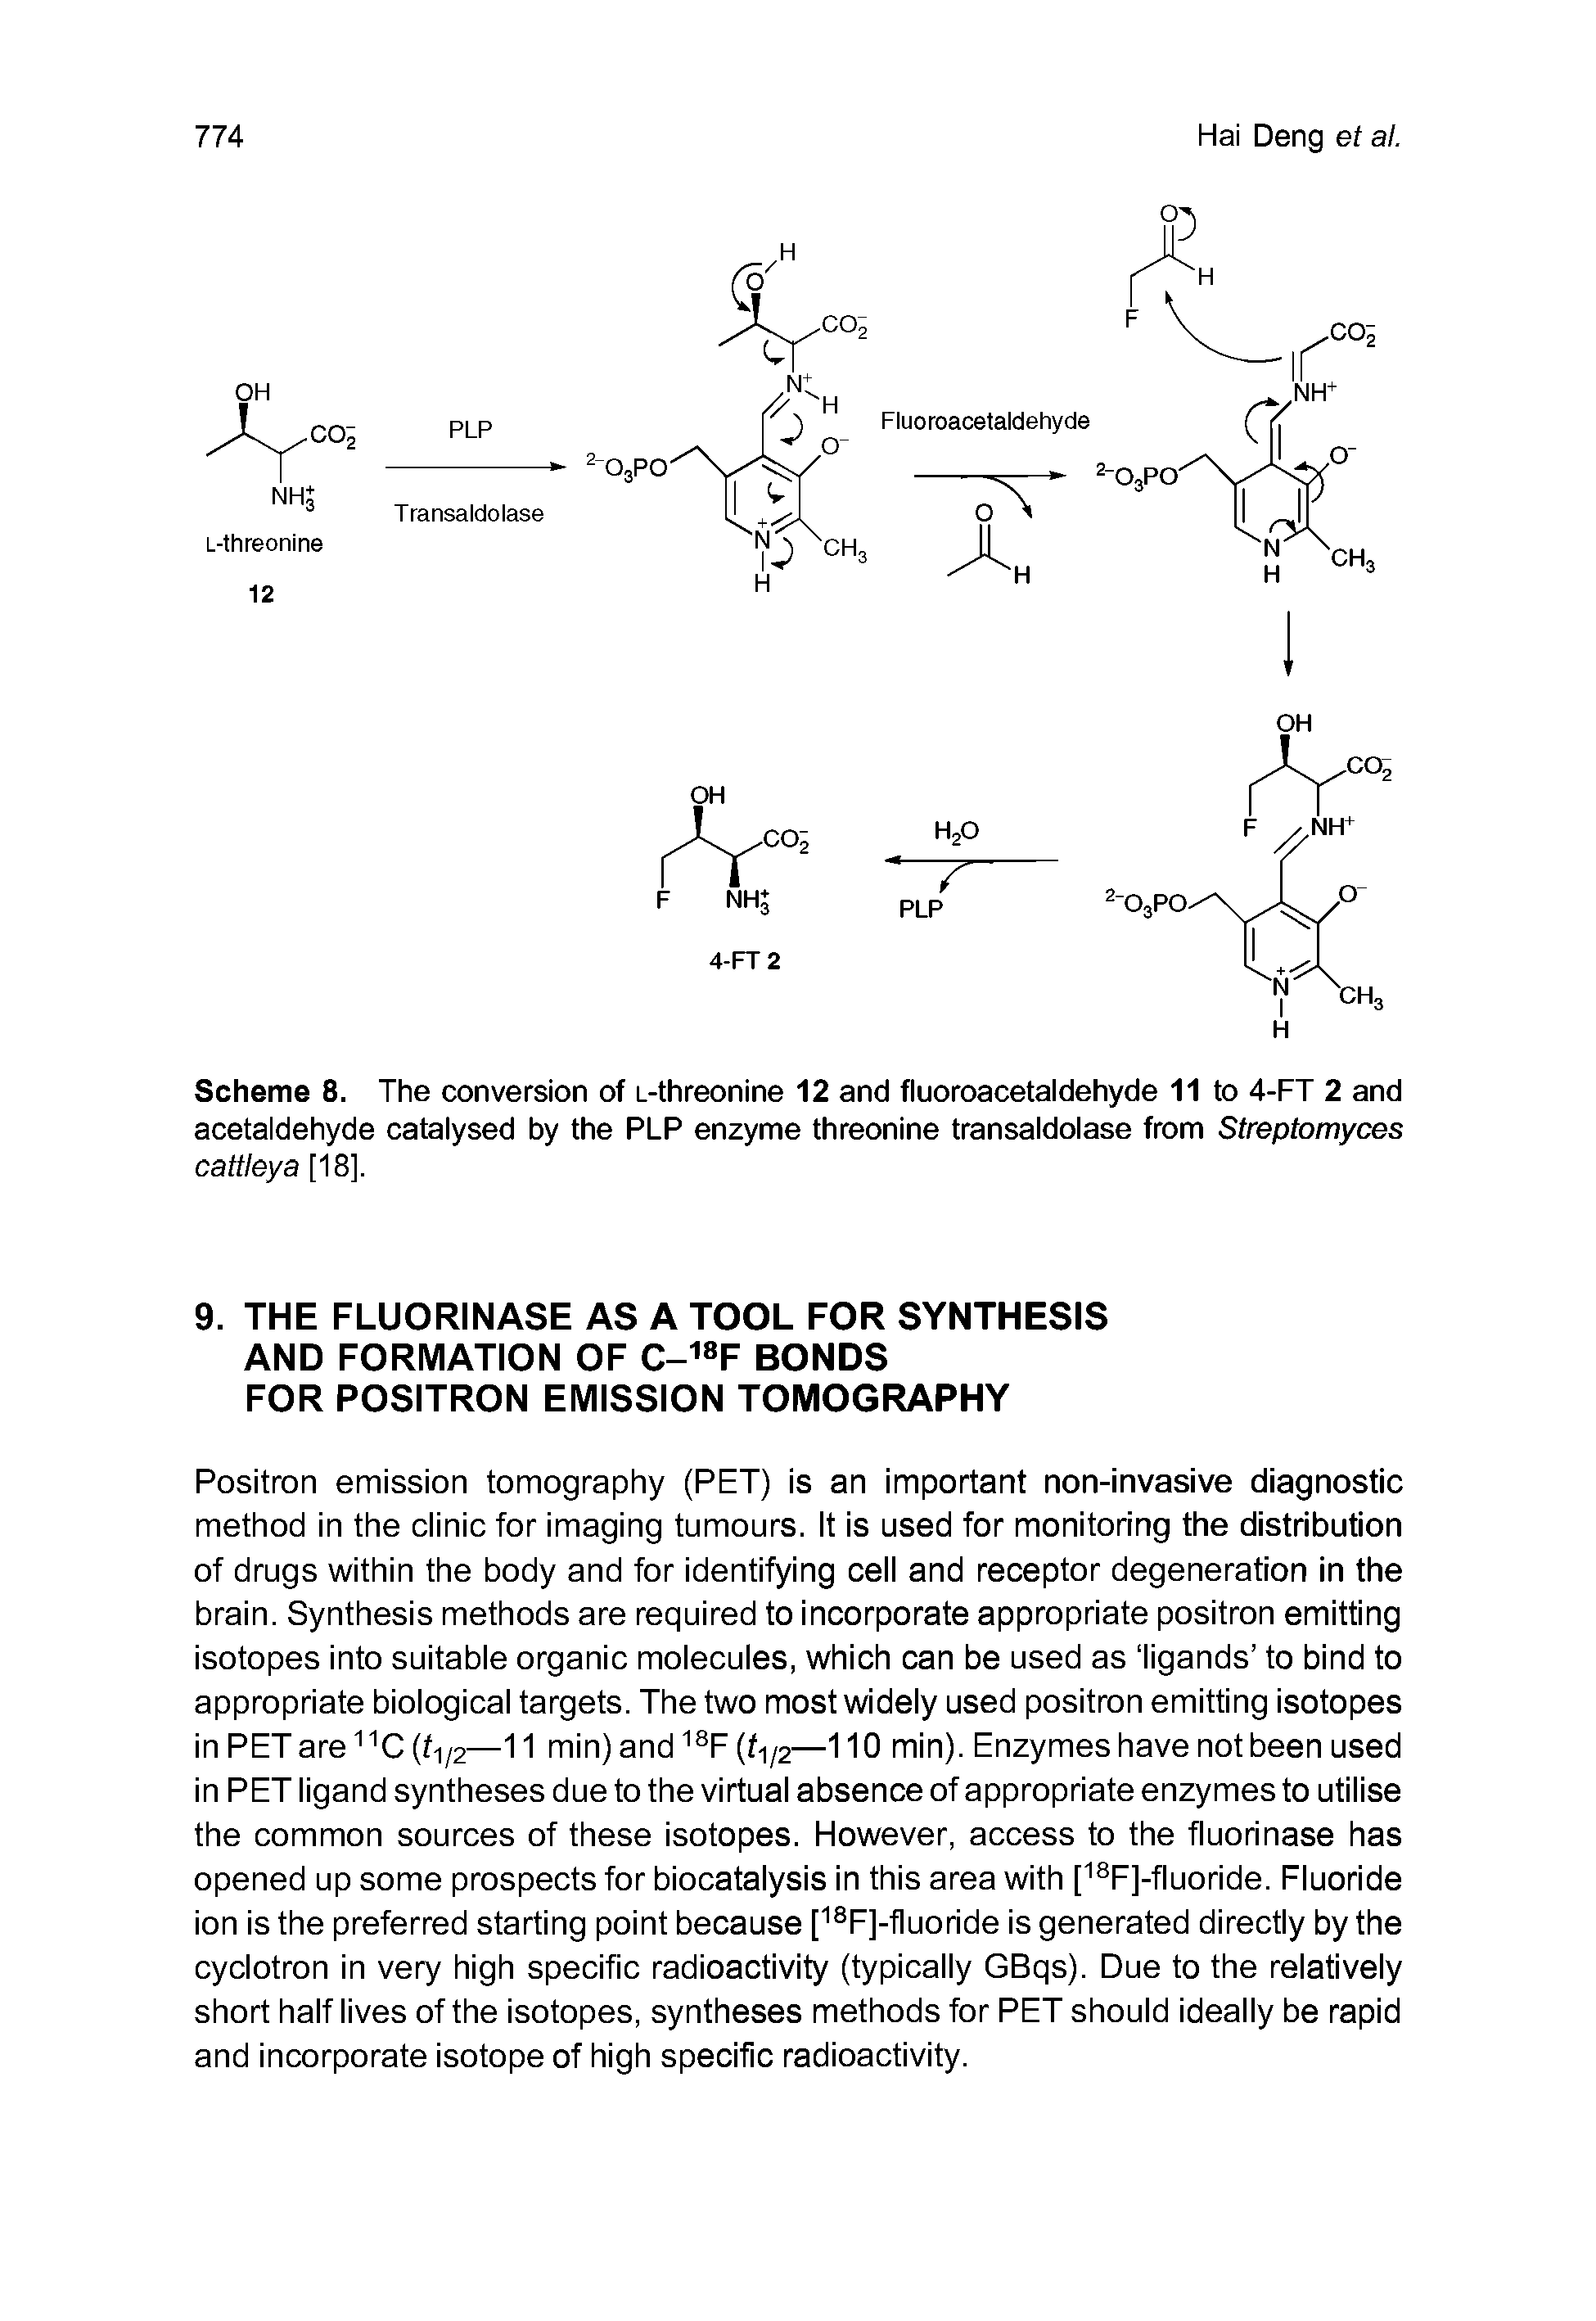 Scheme 8. The conversion of L-threonine 12 and fluoroacetaldehyde 11 to 4-FT 2 and acetaldehyde catalysed by the PLP enzyme threonine transaldolase from Streptomyces cattleya [18].